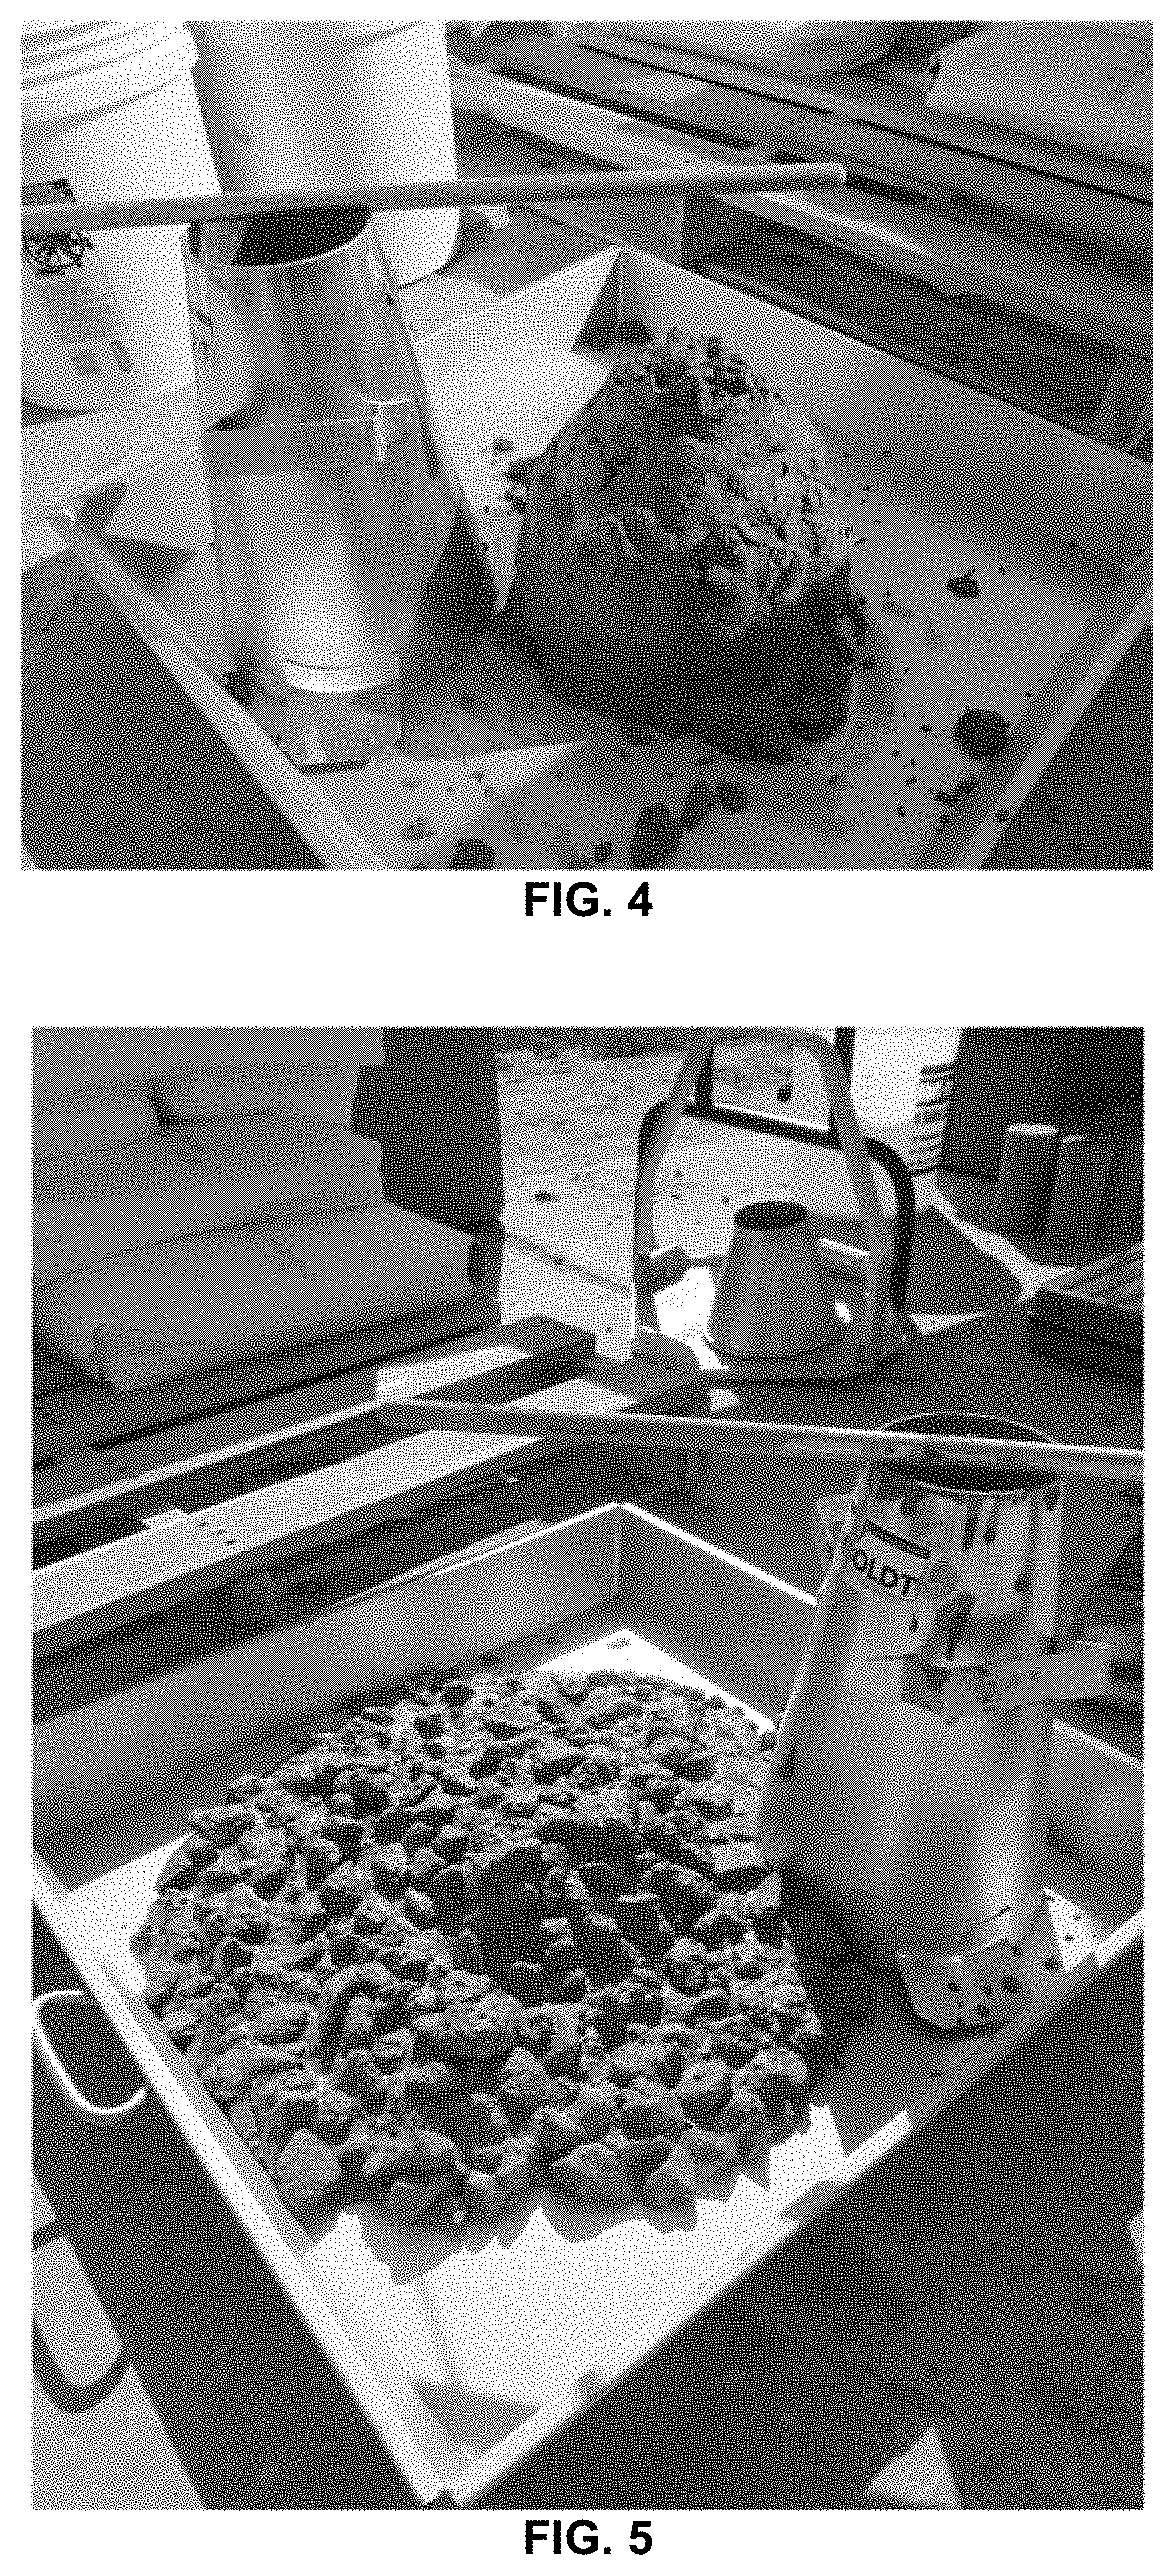 Self-consolidating geopolymer compositions and methods for making same